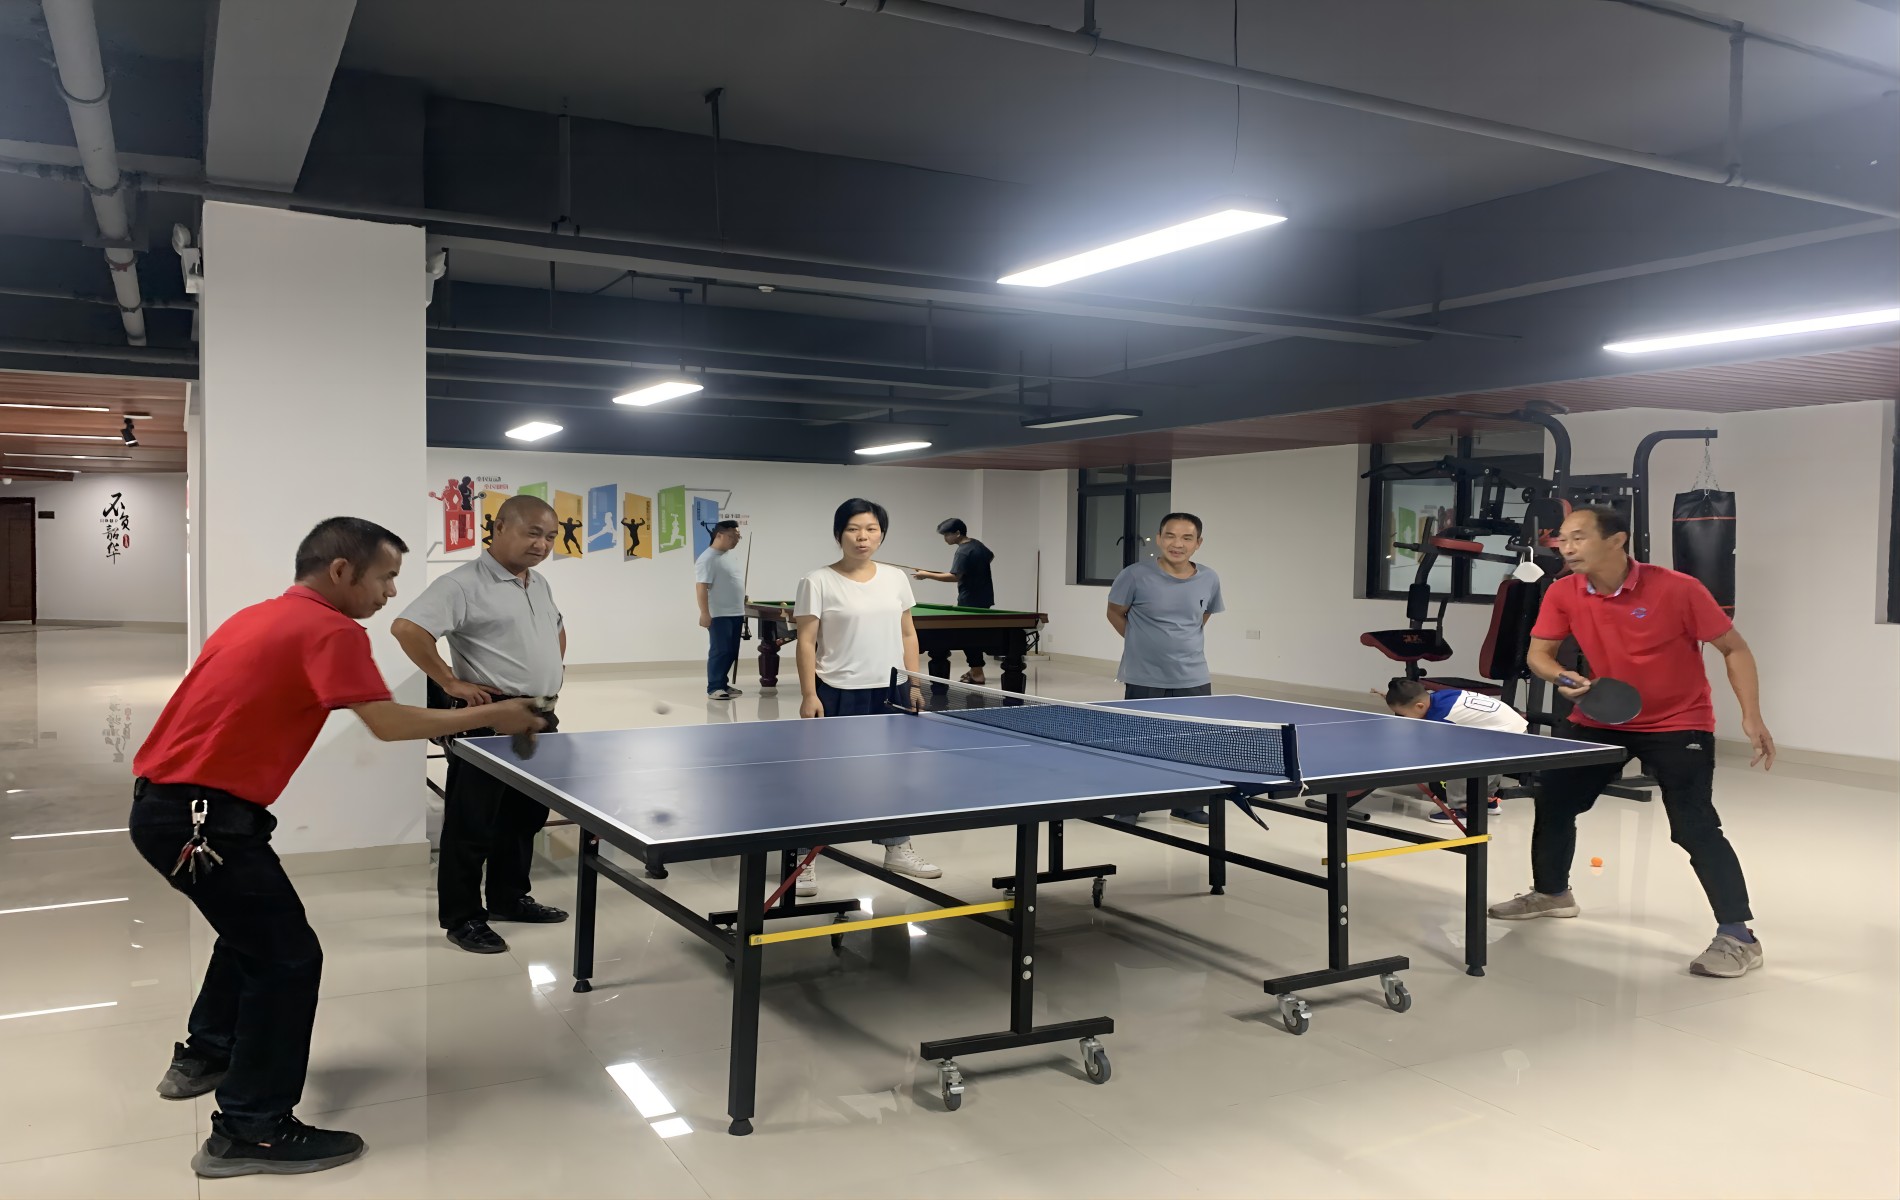 Preparing for the company's annual sports competition